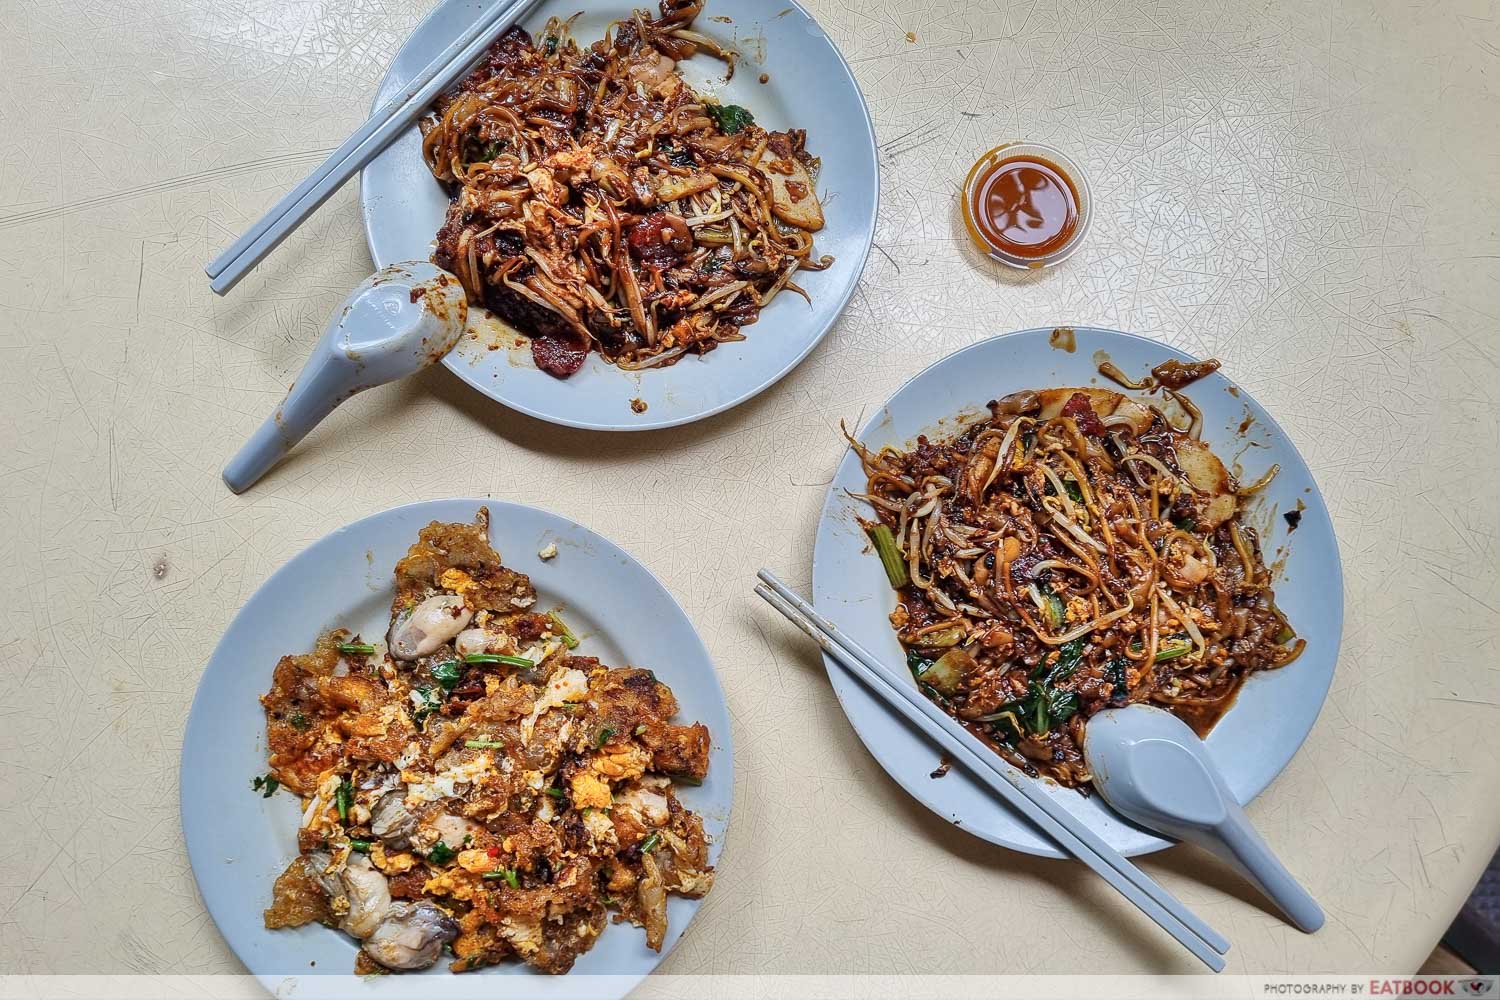 hougang-oyster-omelette-&-fried-kway-teow-flatlay